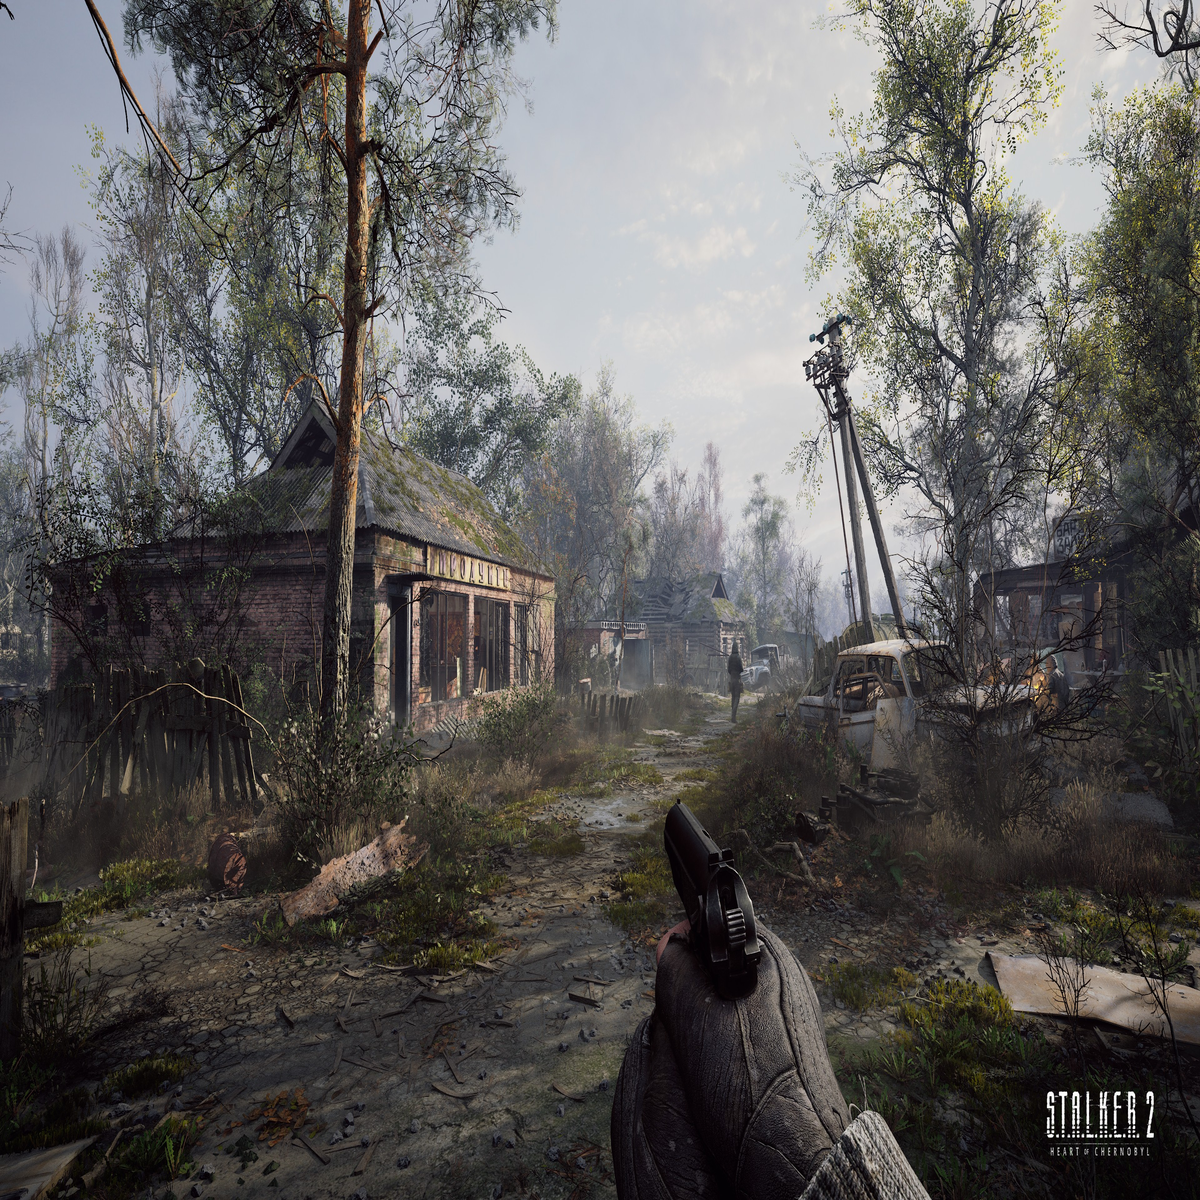 S.T.A.L.K.E.R 2 test footage has leaked online after a year and a half” of  hacker attacks